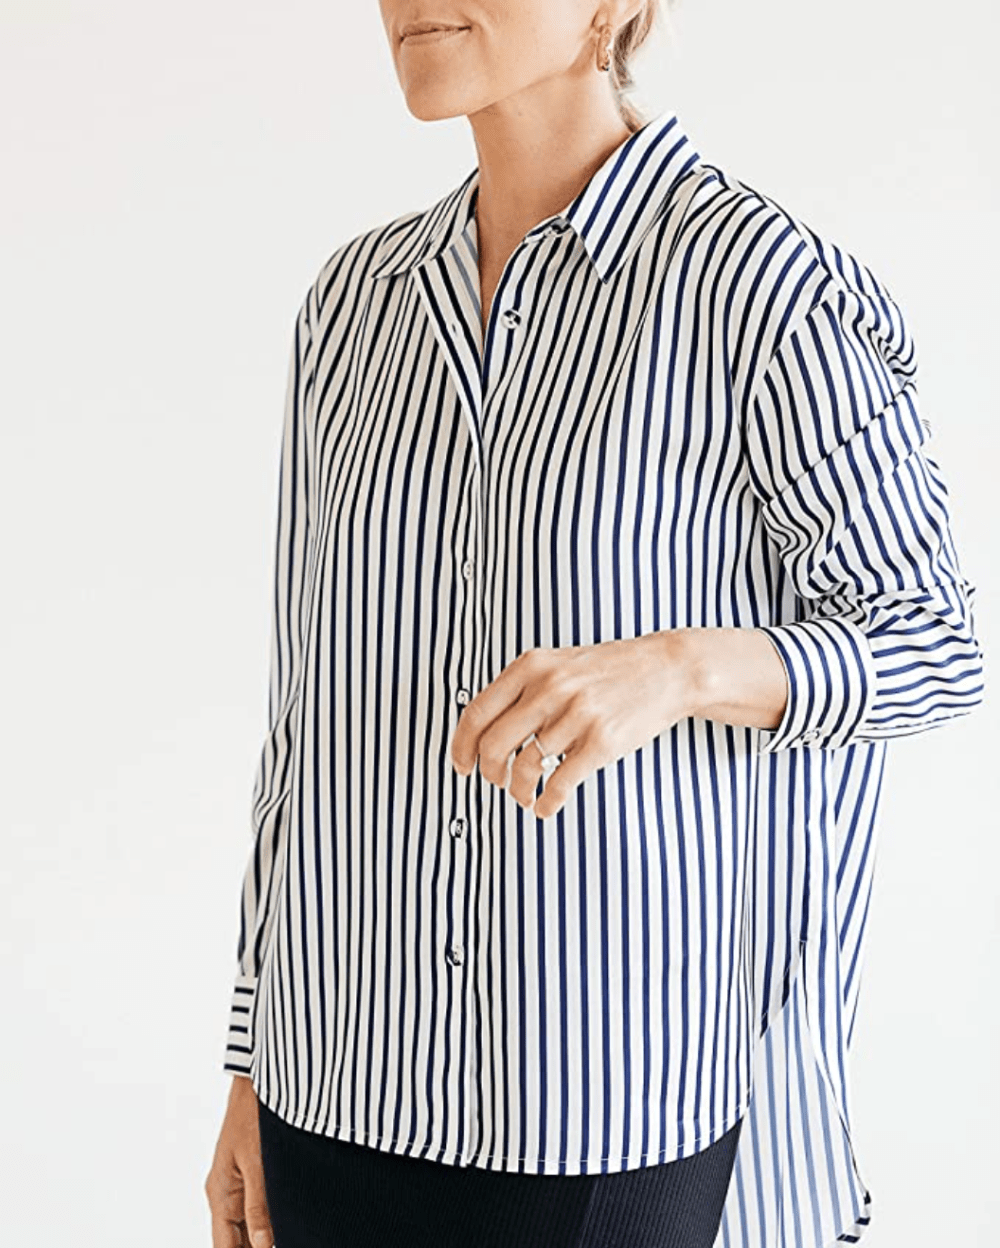 The Drop Women's Navy and White Stripes High-Low Button-Down Shirt by @jaceyduprie